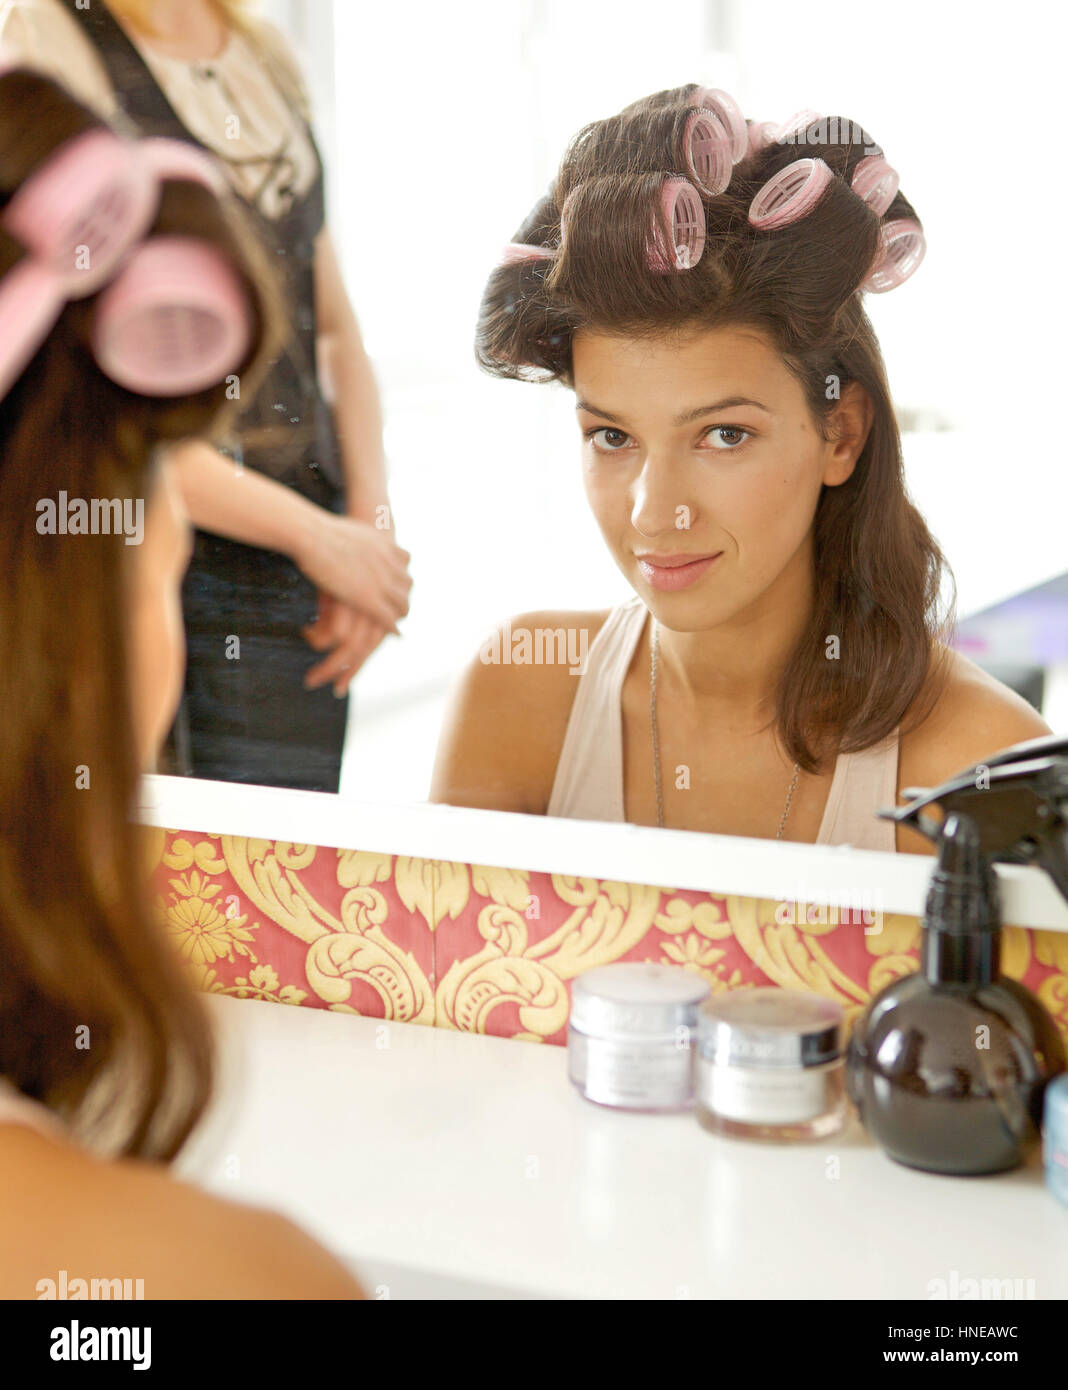 Portrait of young woman with hair curlers smiling Stock Photo